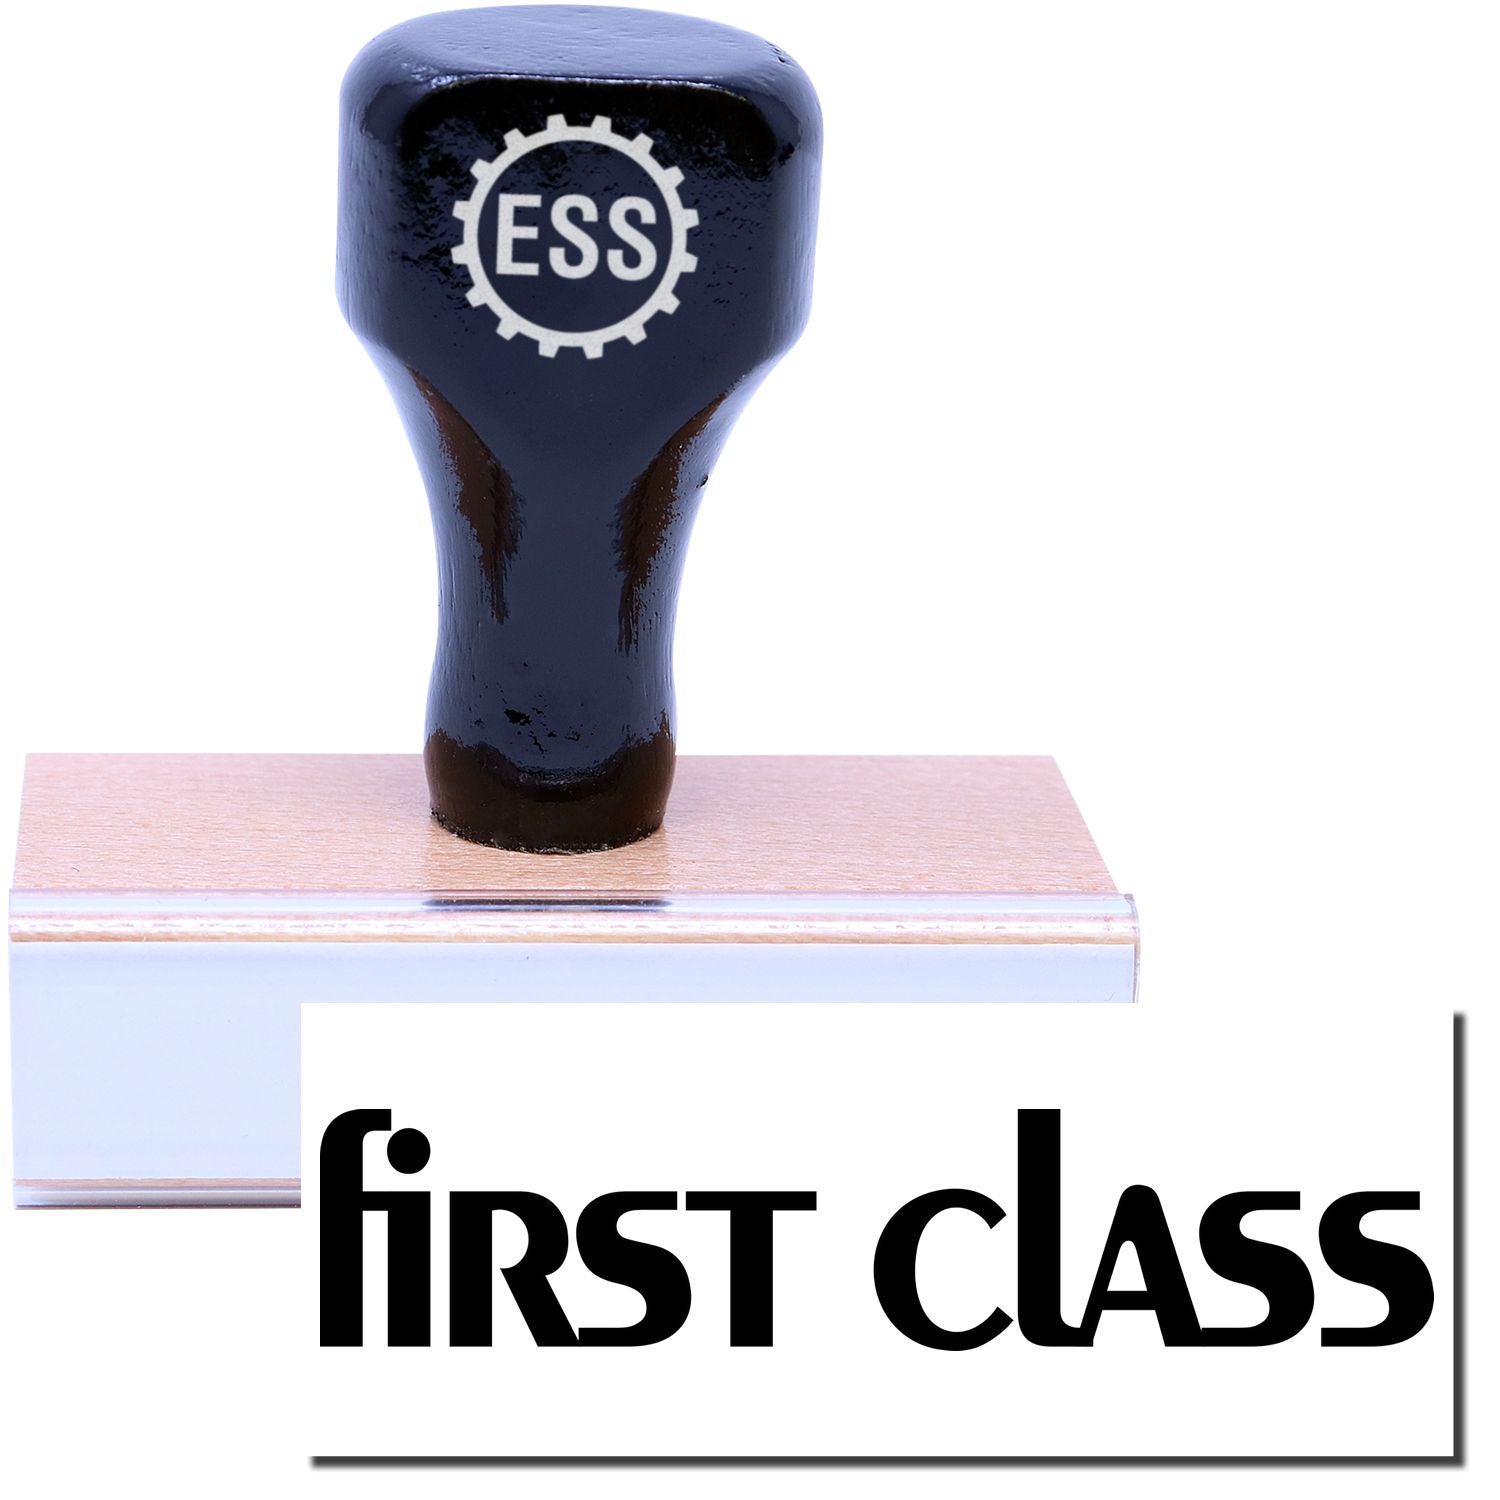 A stock office rubber stamp with a stamped image showing how the text "first class" in a lowercase font is displayed after stamping.